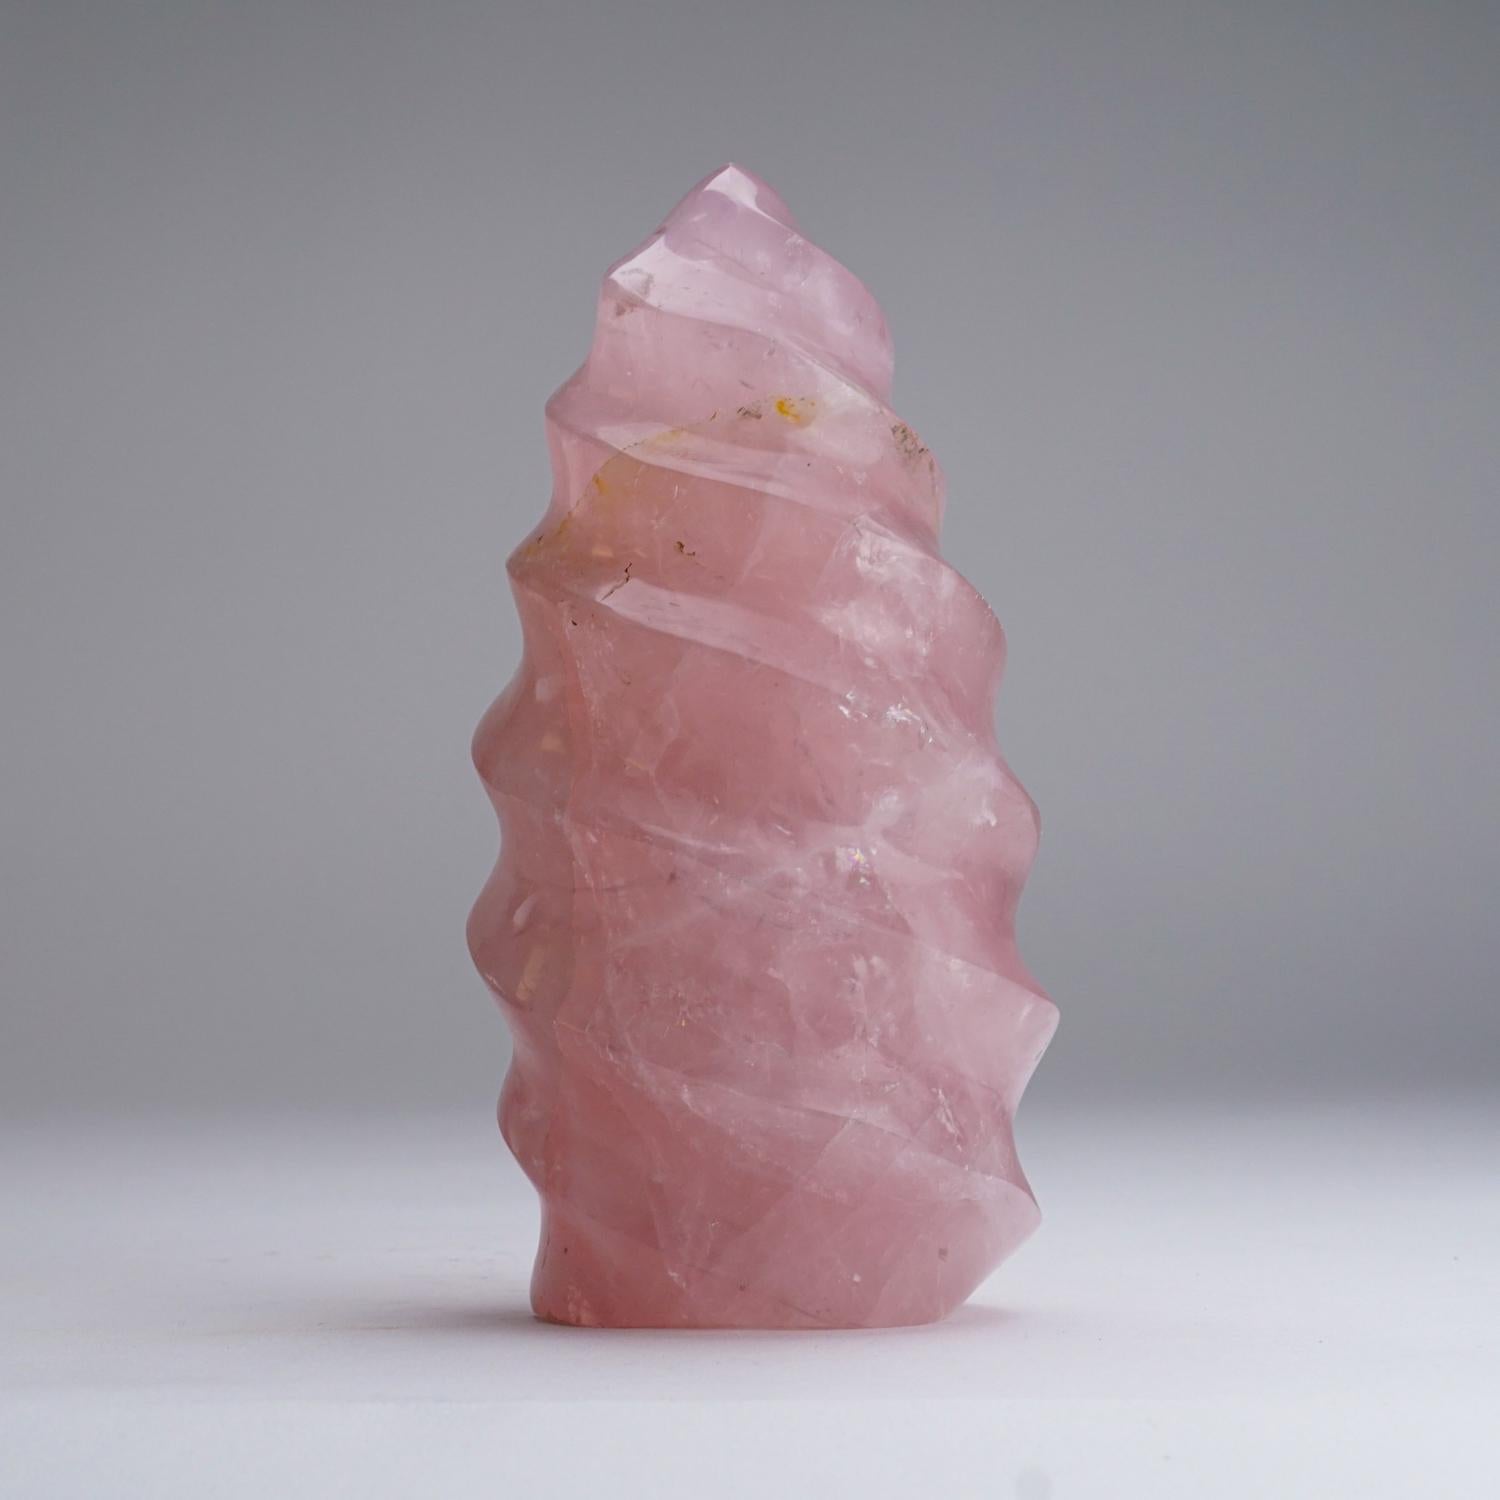 Contemporary Rose Quartz Flame Stone From Brazil (4.6 lbs) For Sale